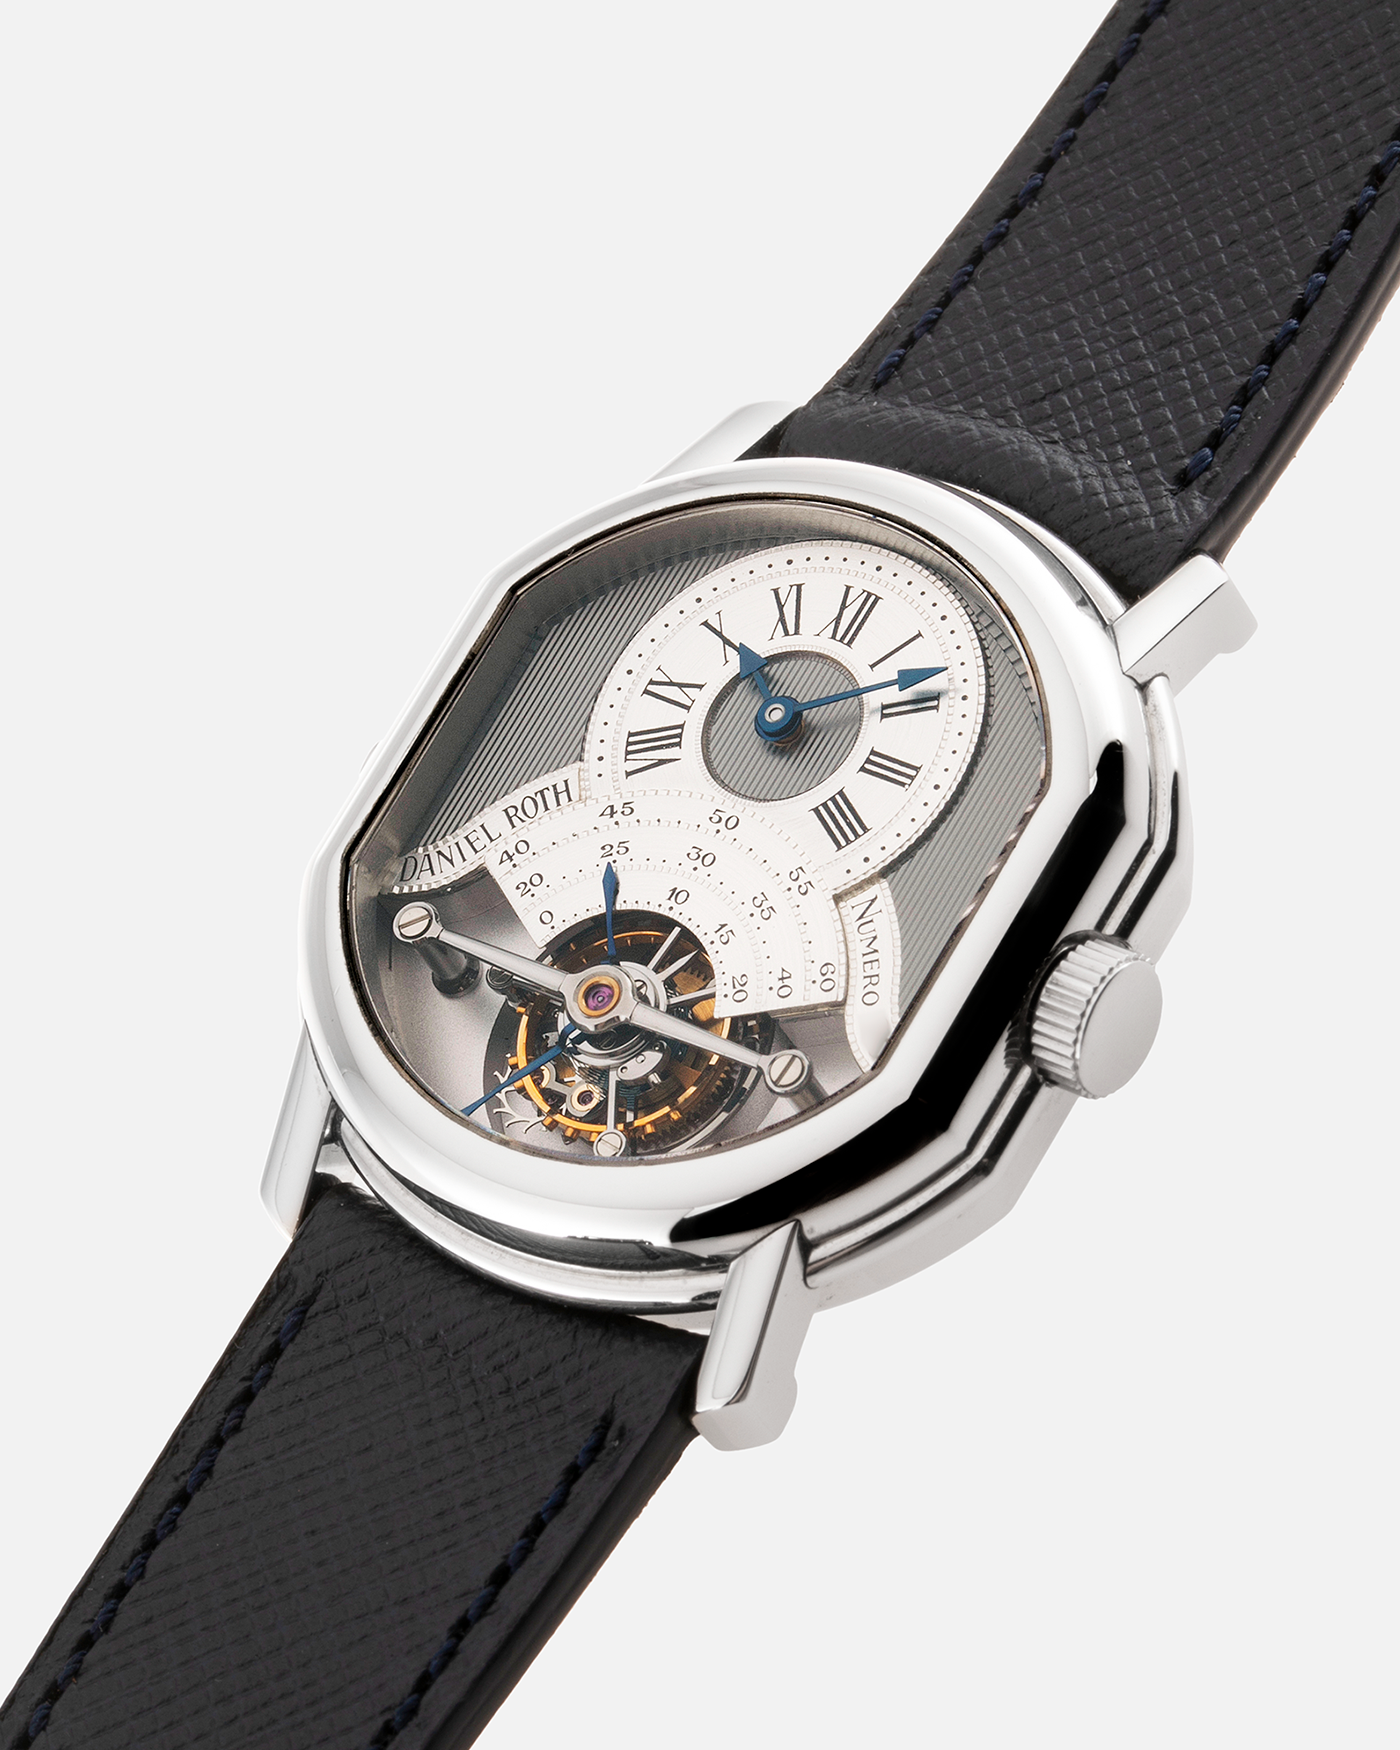 Brand: Daniel Roth Year: 1990’s Model: 2187 Material: Stainless Steel Movement: Cal. DR 307 One-Minute Tourbillon Regulator Case Diameter: 35mm X 38mm Strap: Molequin Navy Blue Textured Calf and Stainless Steel Deployant Clasp